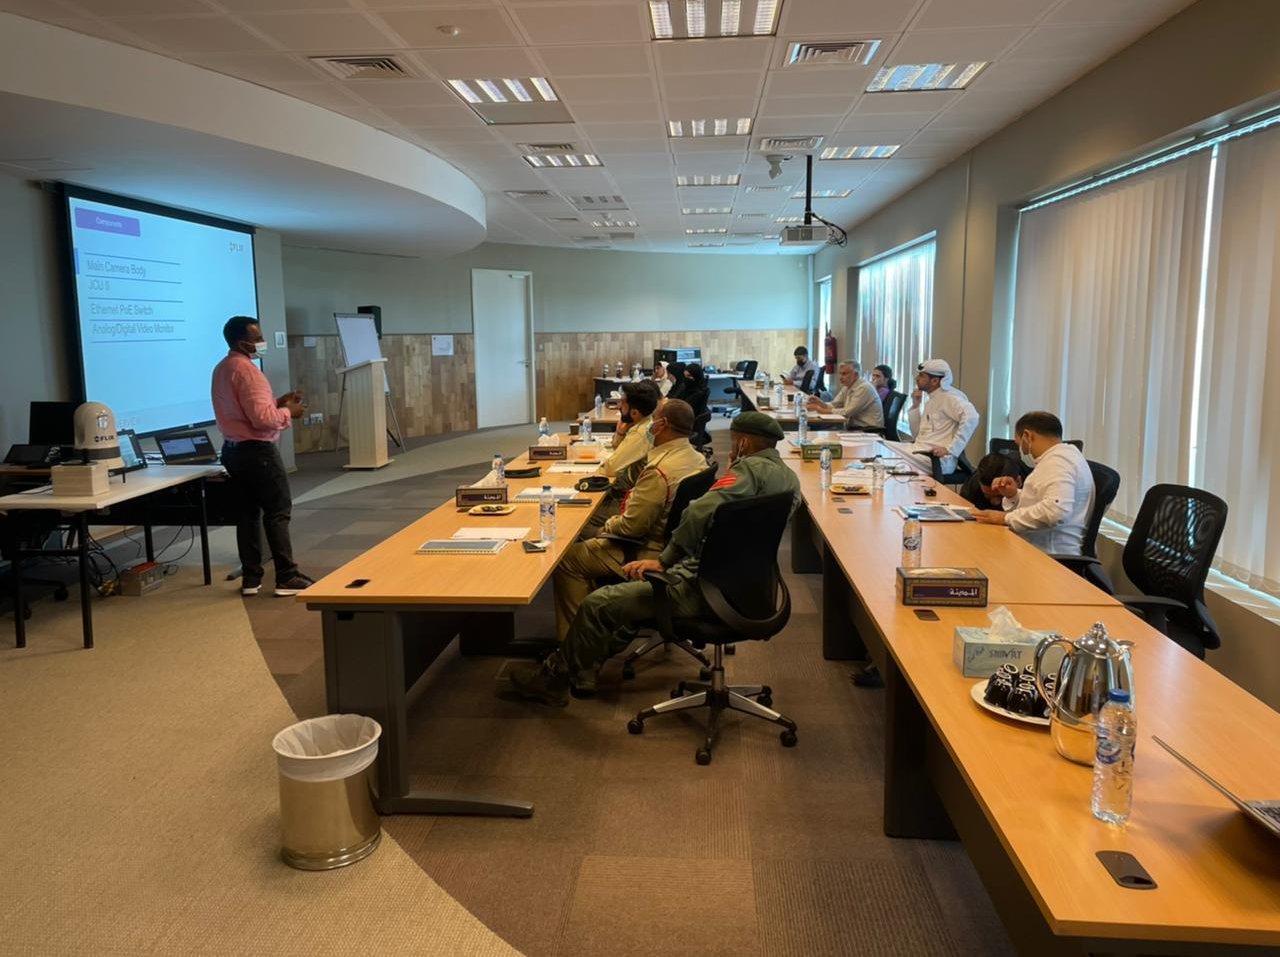 Hytera showcased its public safety solution at the training for Dubai Police 2